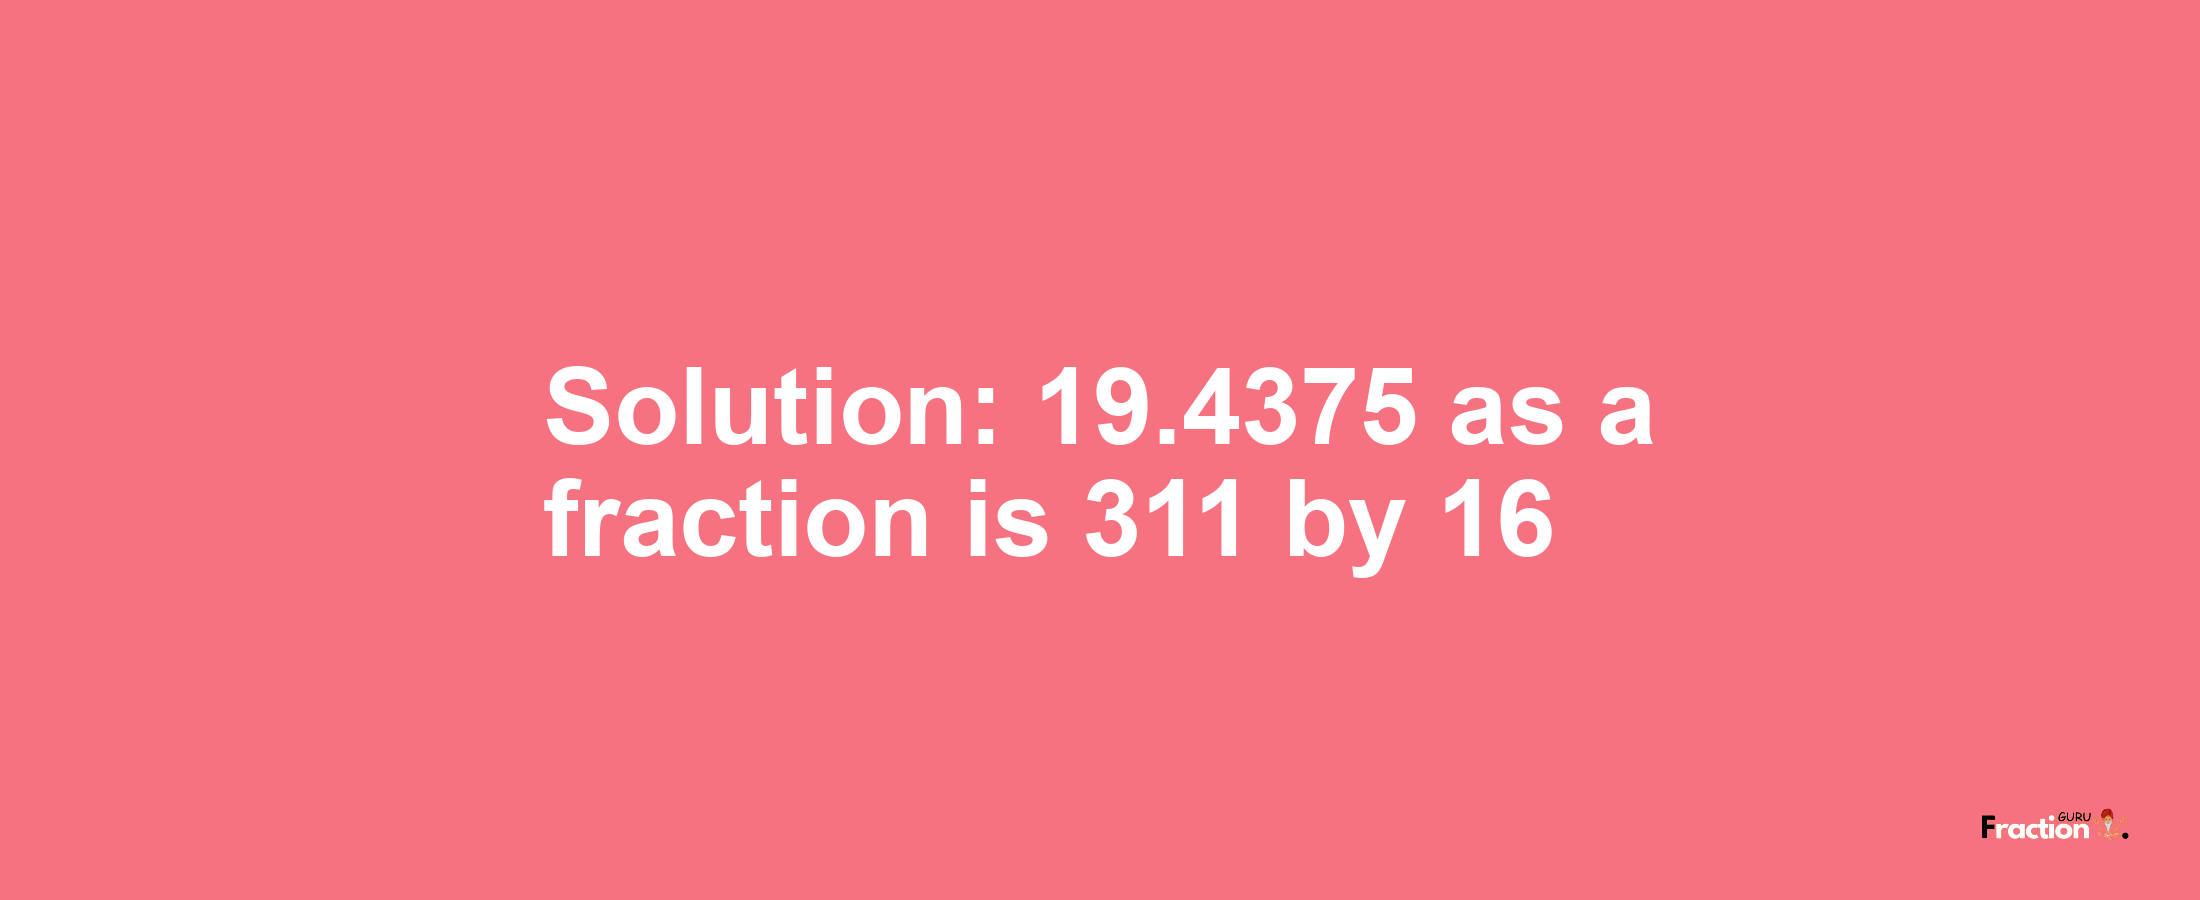 Solution:19.4375 as a fraction is 311/16